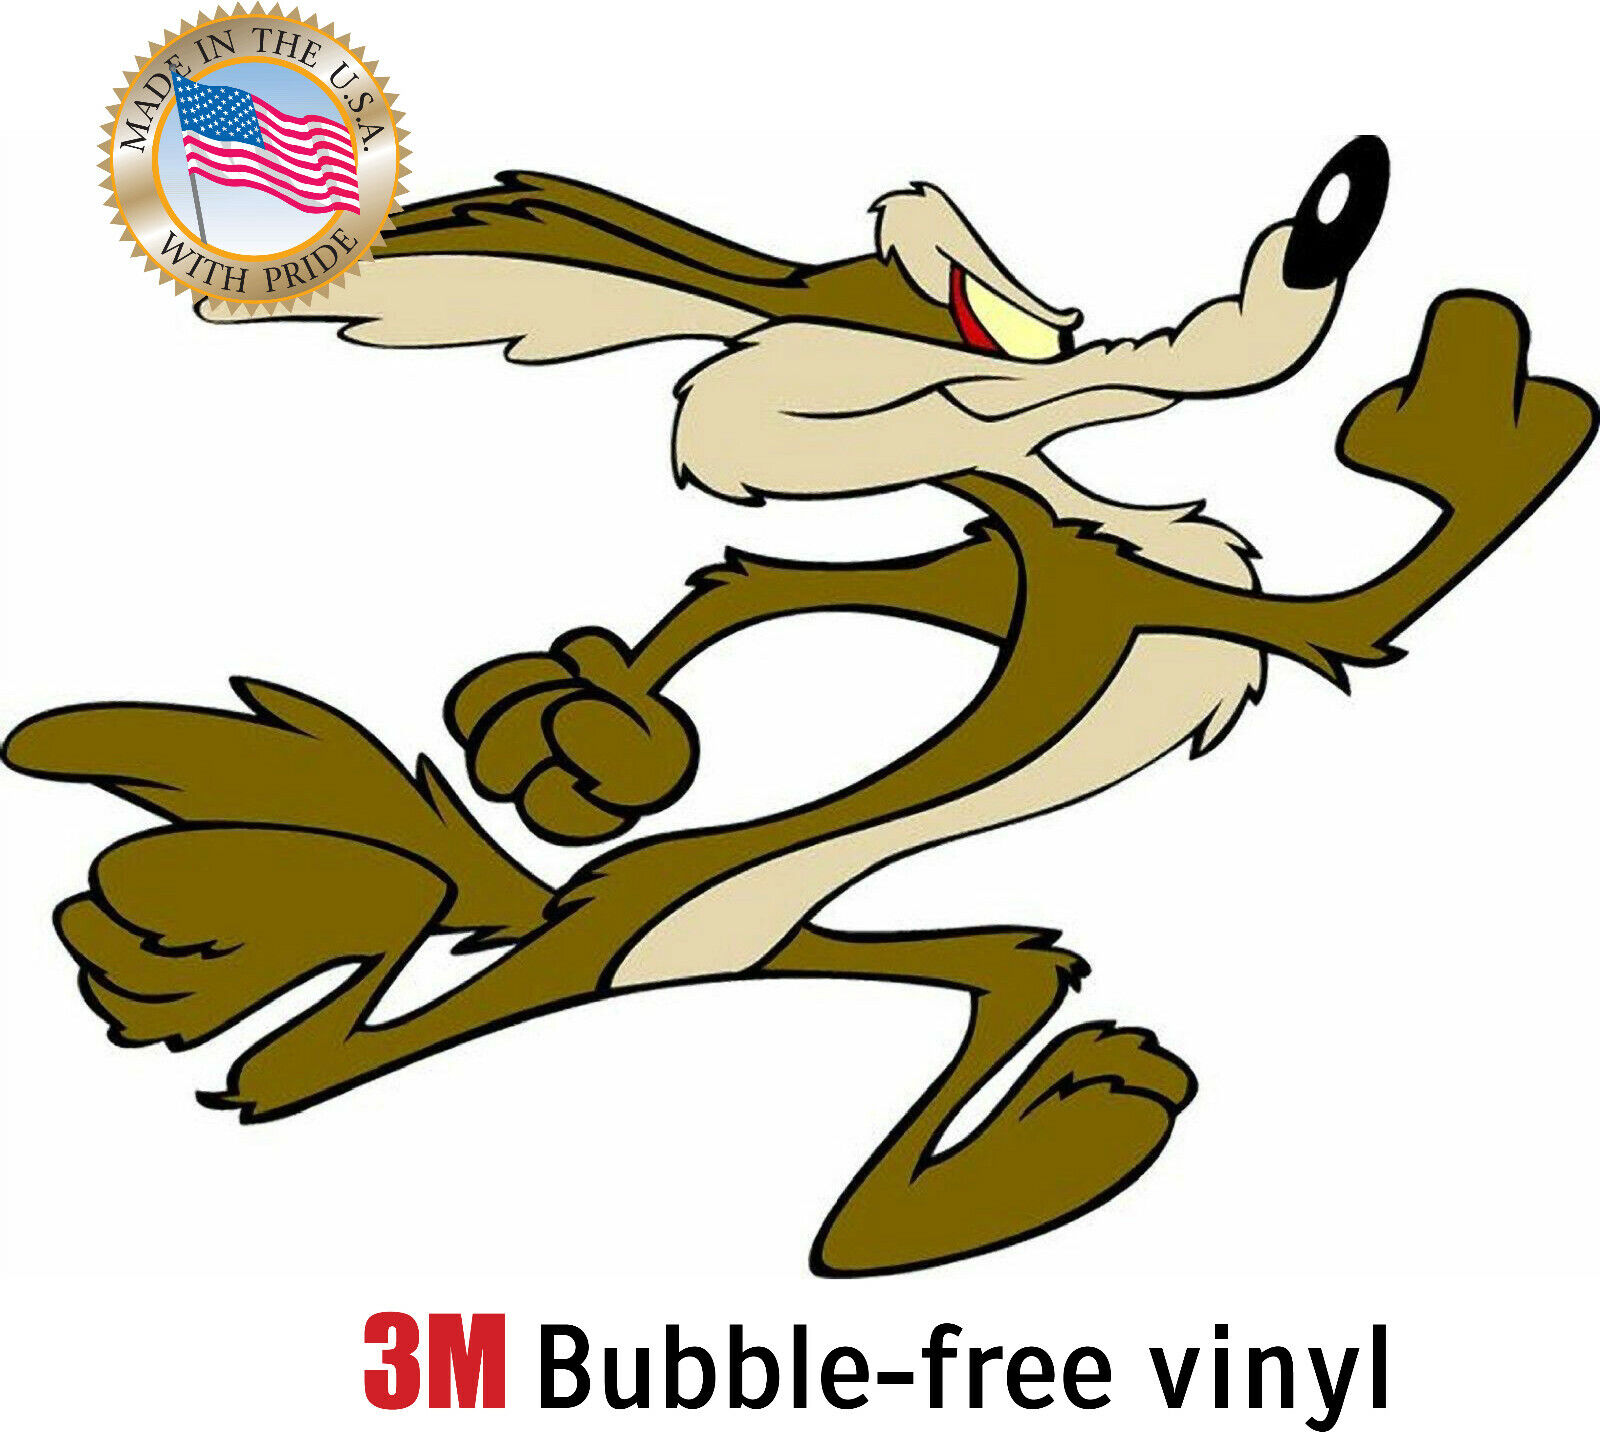 WILE E COYOTE RUNNING RIGHT DECAL 3M STICKER MADE IN USA WINDOW CAR BIKE LAPTOP